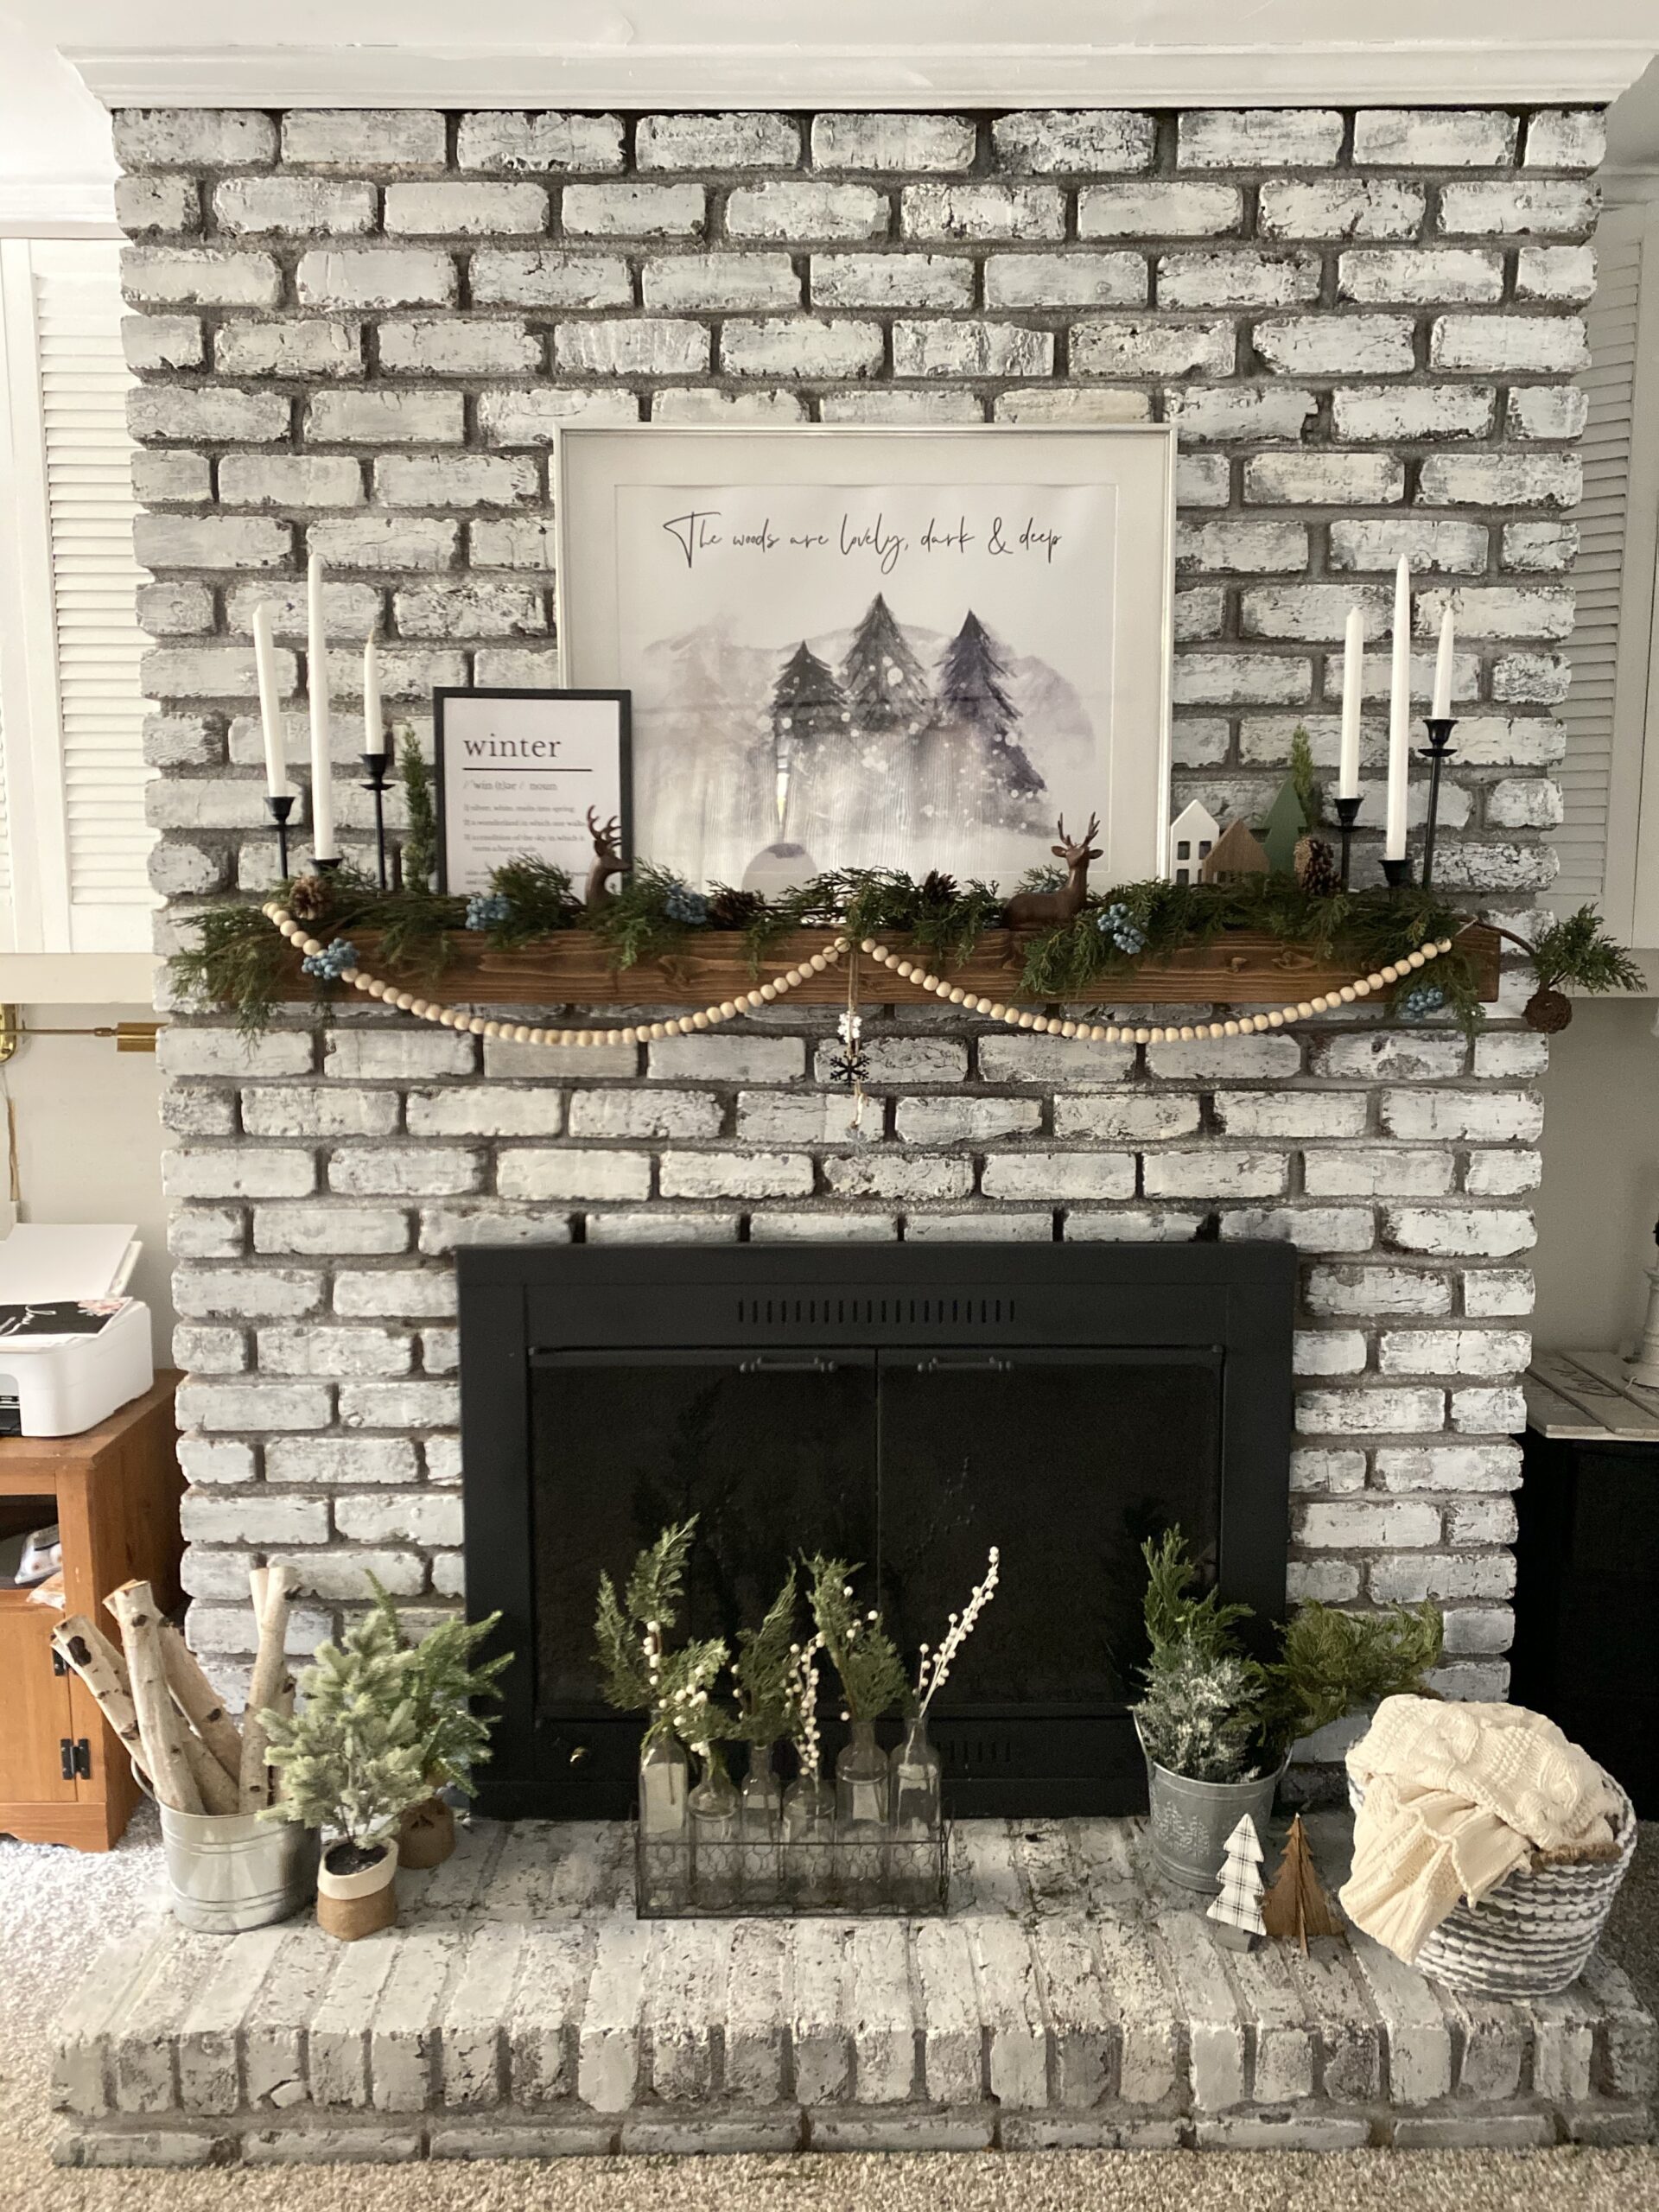 winter rustic mantel decor styled in farmhouse style